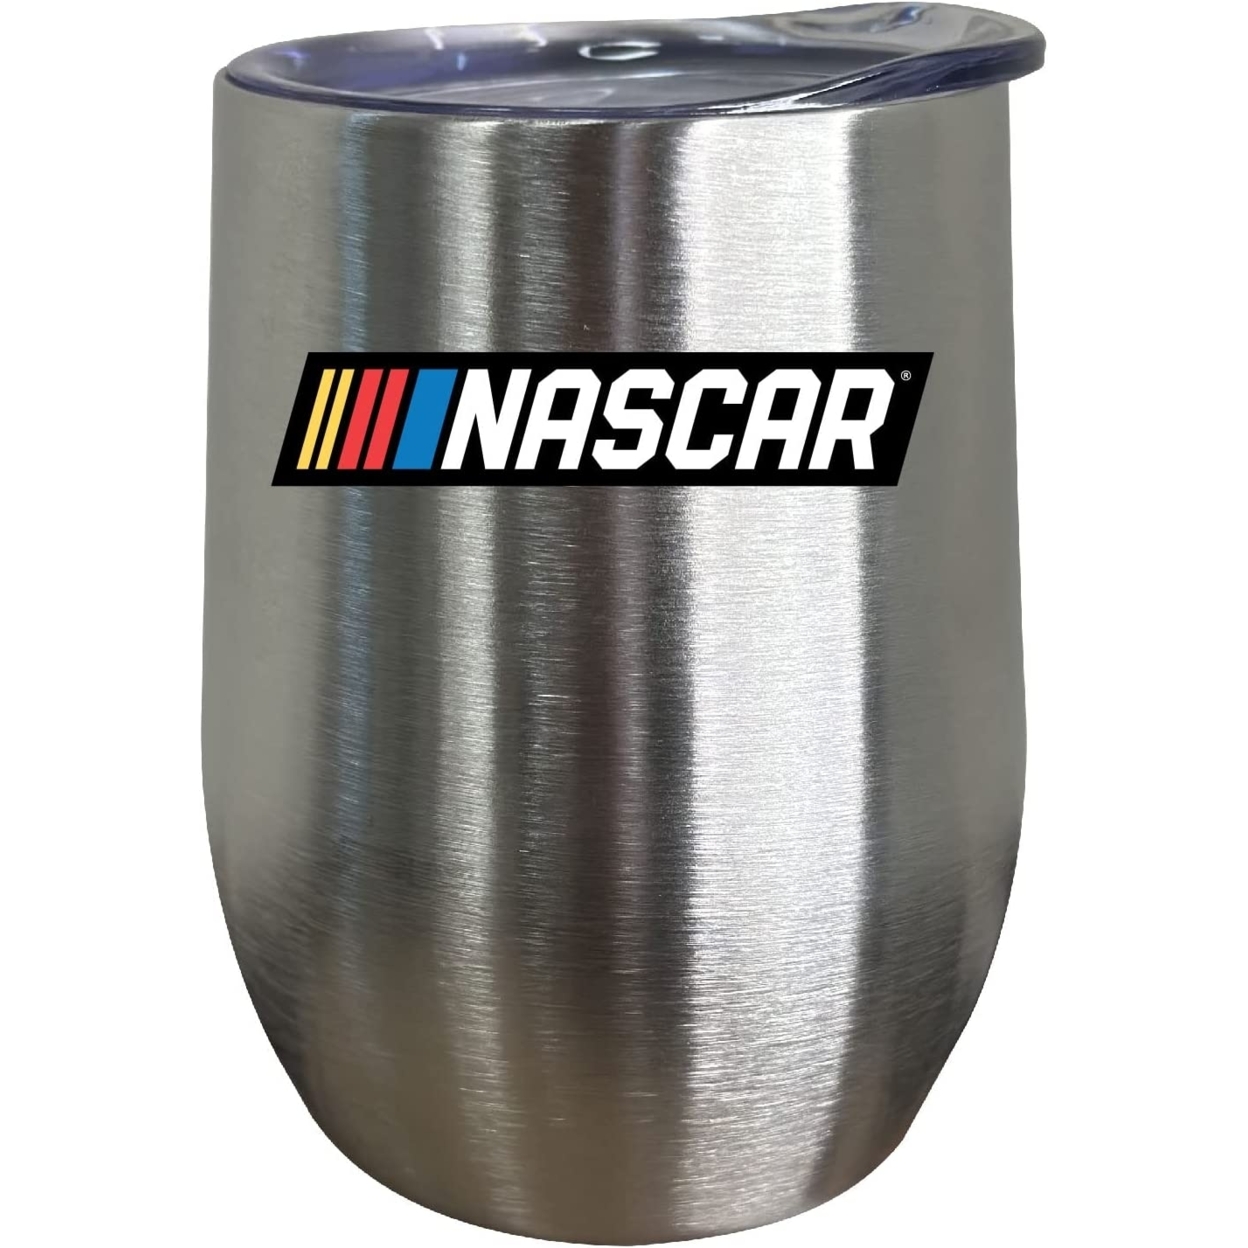 NASCAR Officially Licensed Insulated Wine Stainless Steel Tumbler